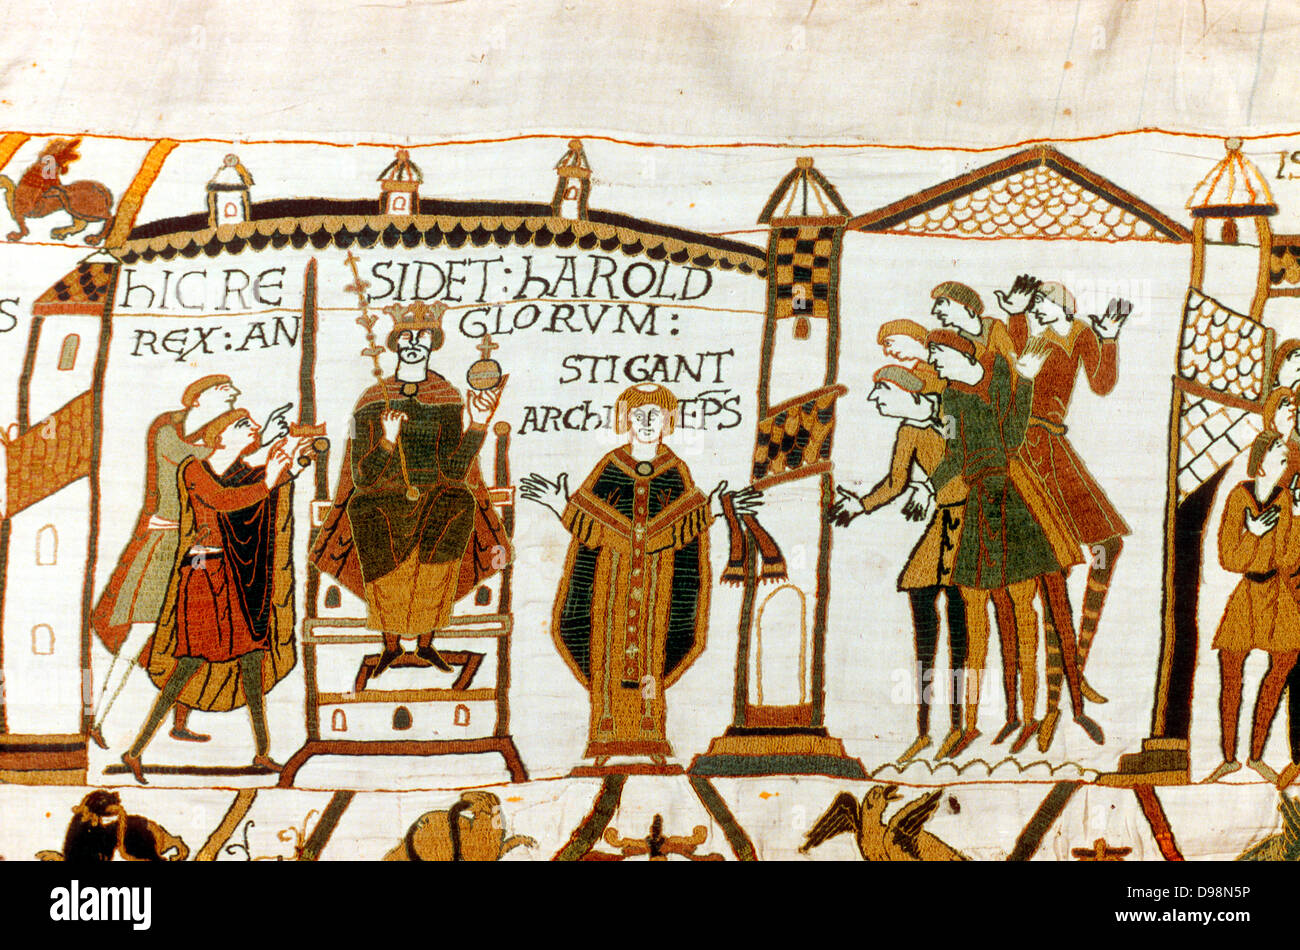 Bayeux Tapestry 1067. Harold II crowned King of England, 6 January 1066. Harold enthroned holding orb and sceptre, Archbishop Stigand on his right. Anglo-Saxon Coronation Ceremony Christian Textile Embroidery Linen Stock Photo